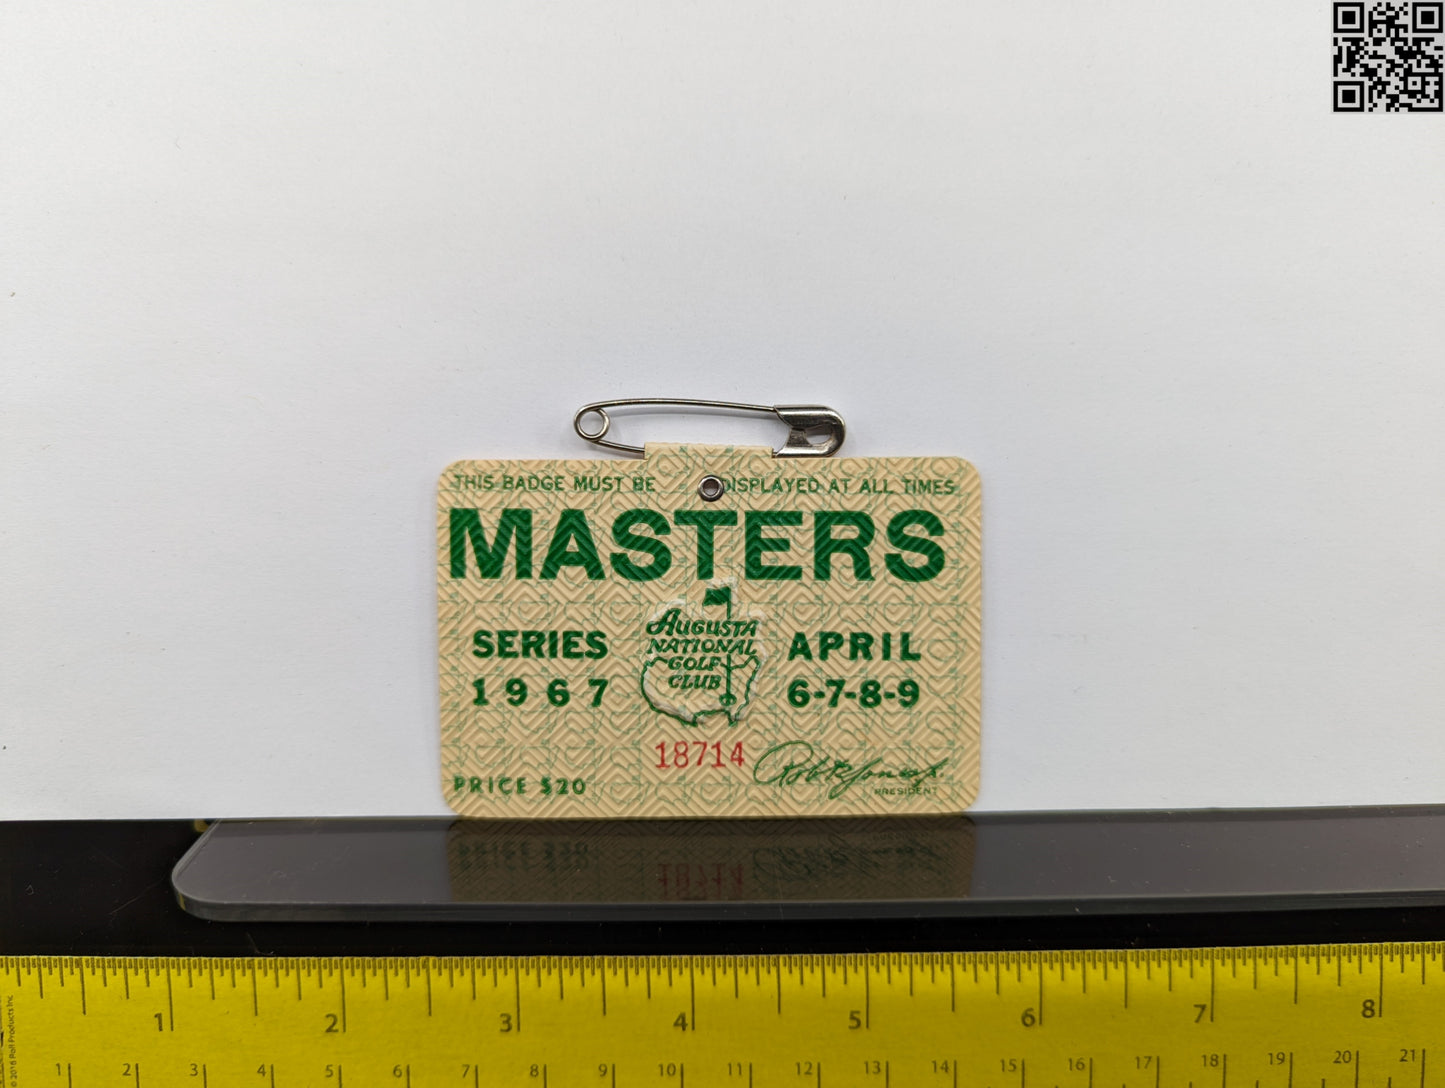 1967 Masters Tournament Series Badge - Augusta National Golf Club - Gay Brewer Win